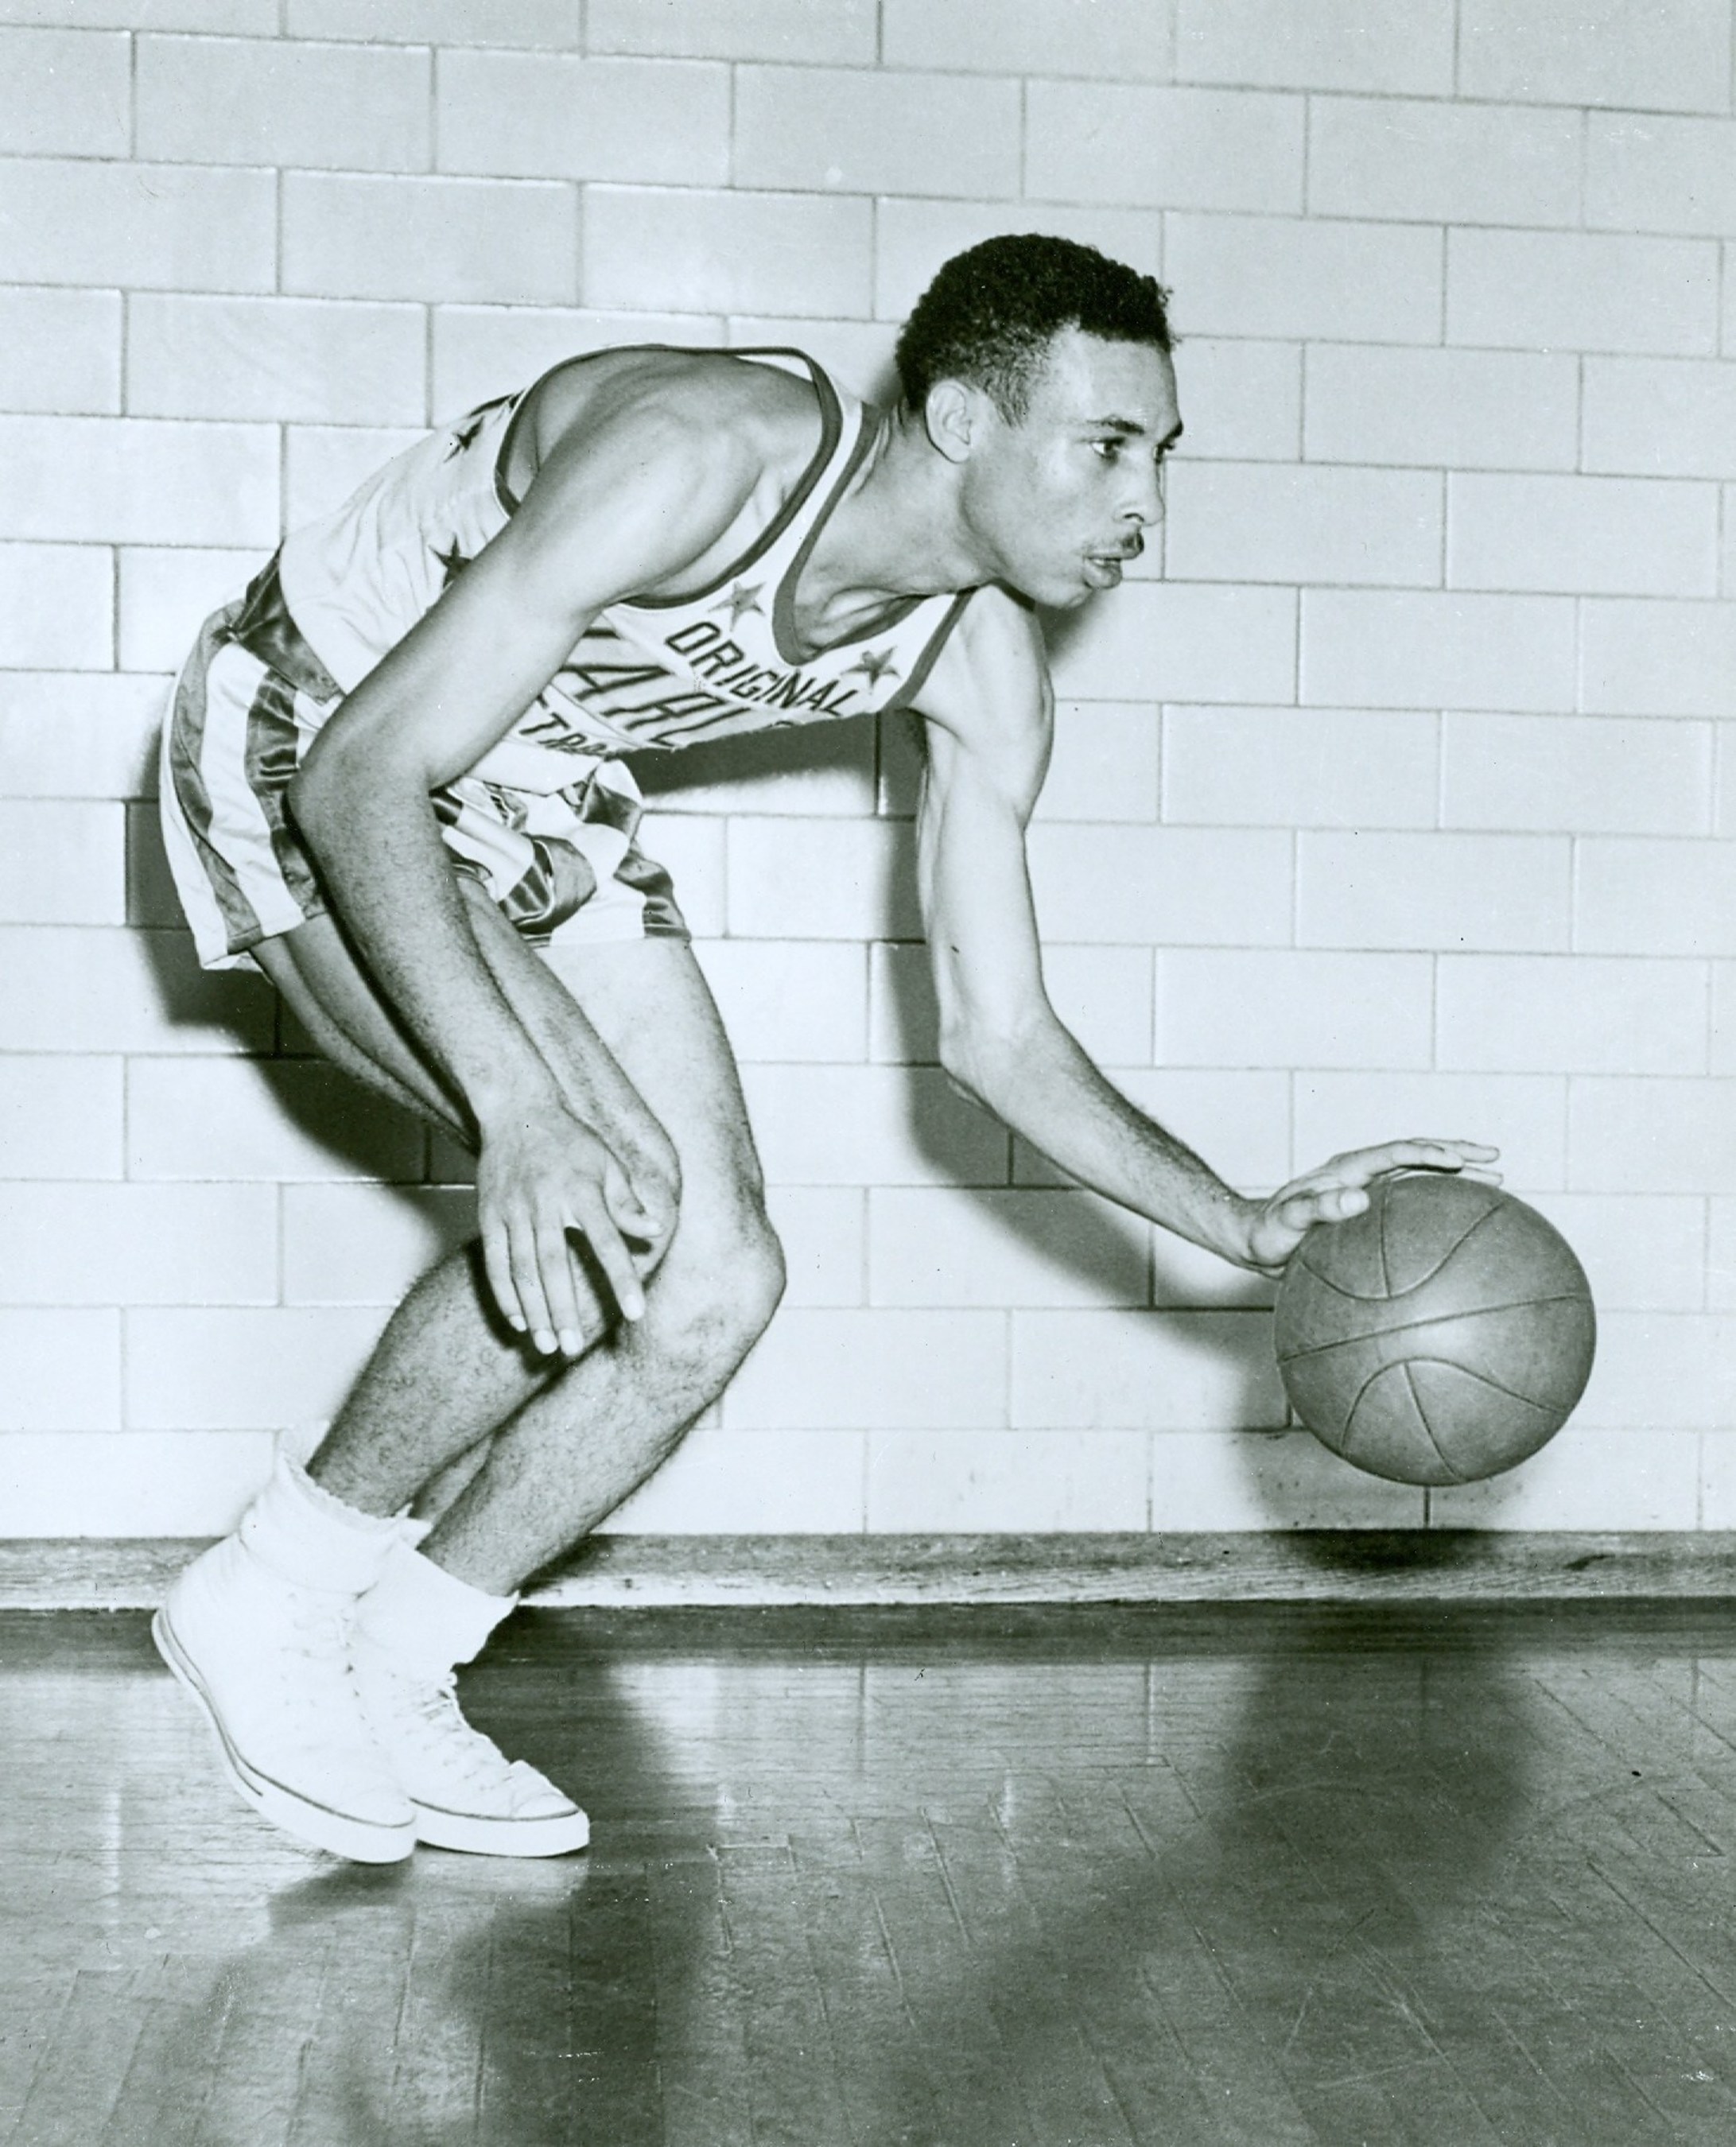 Tex Harrison spent six decades with the Harlem Globetrotters as a player and coach.